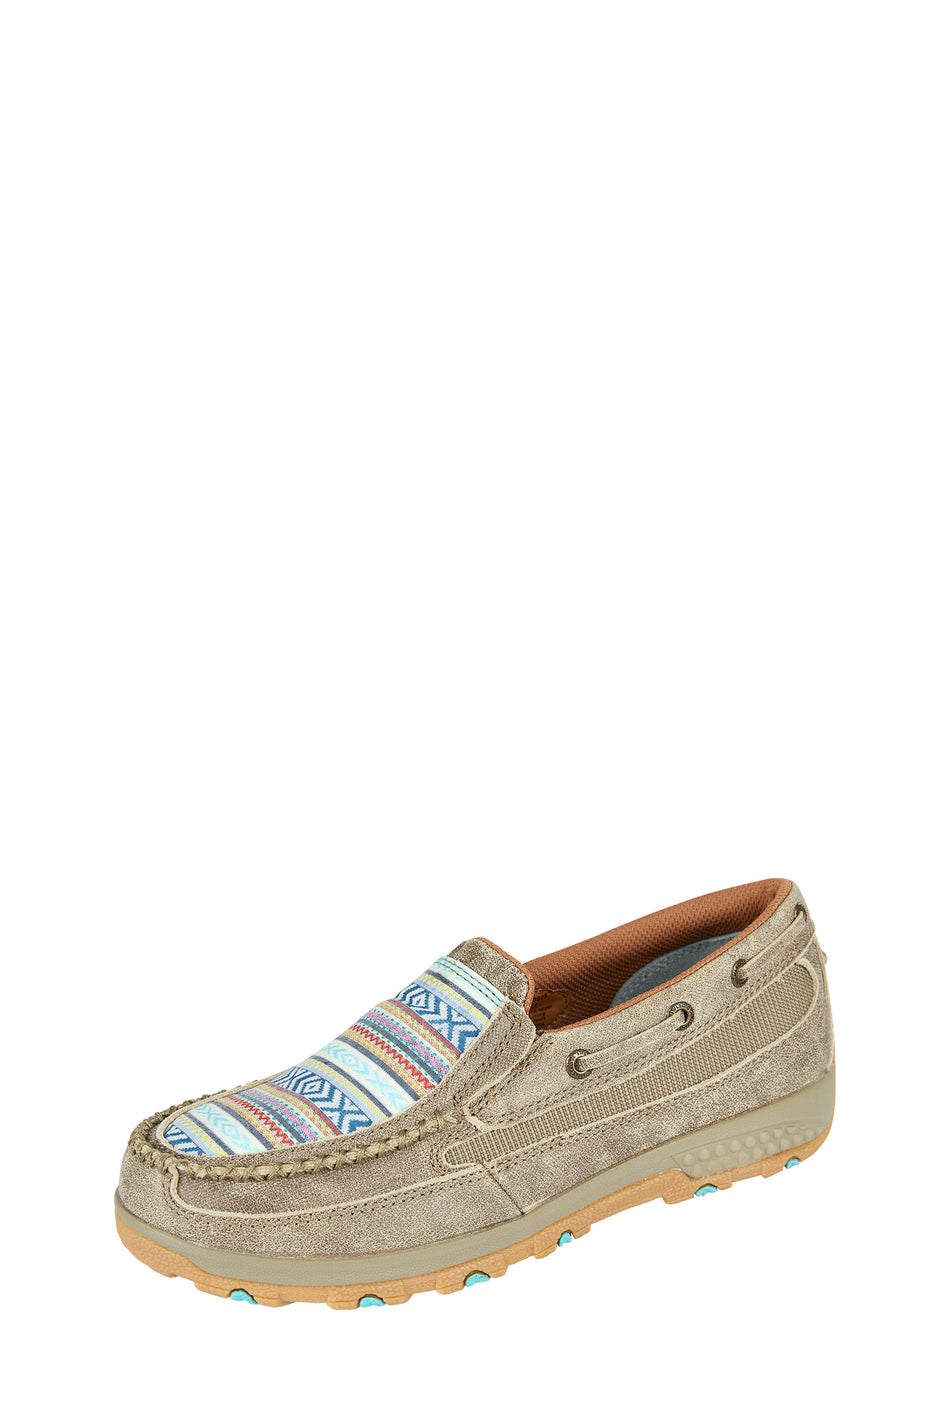 Twisted X - Womens Aztec Cellstretch Slip On